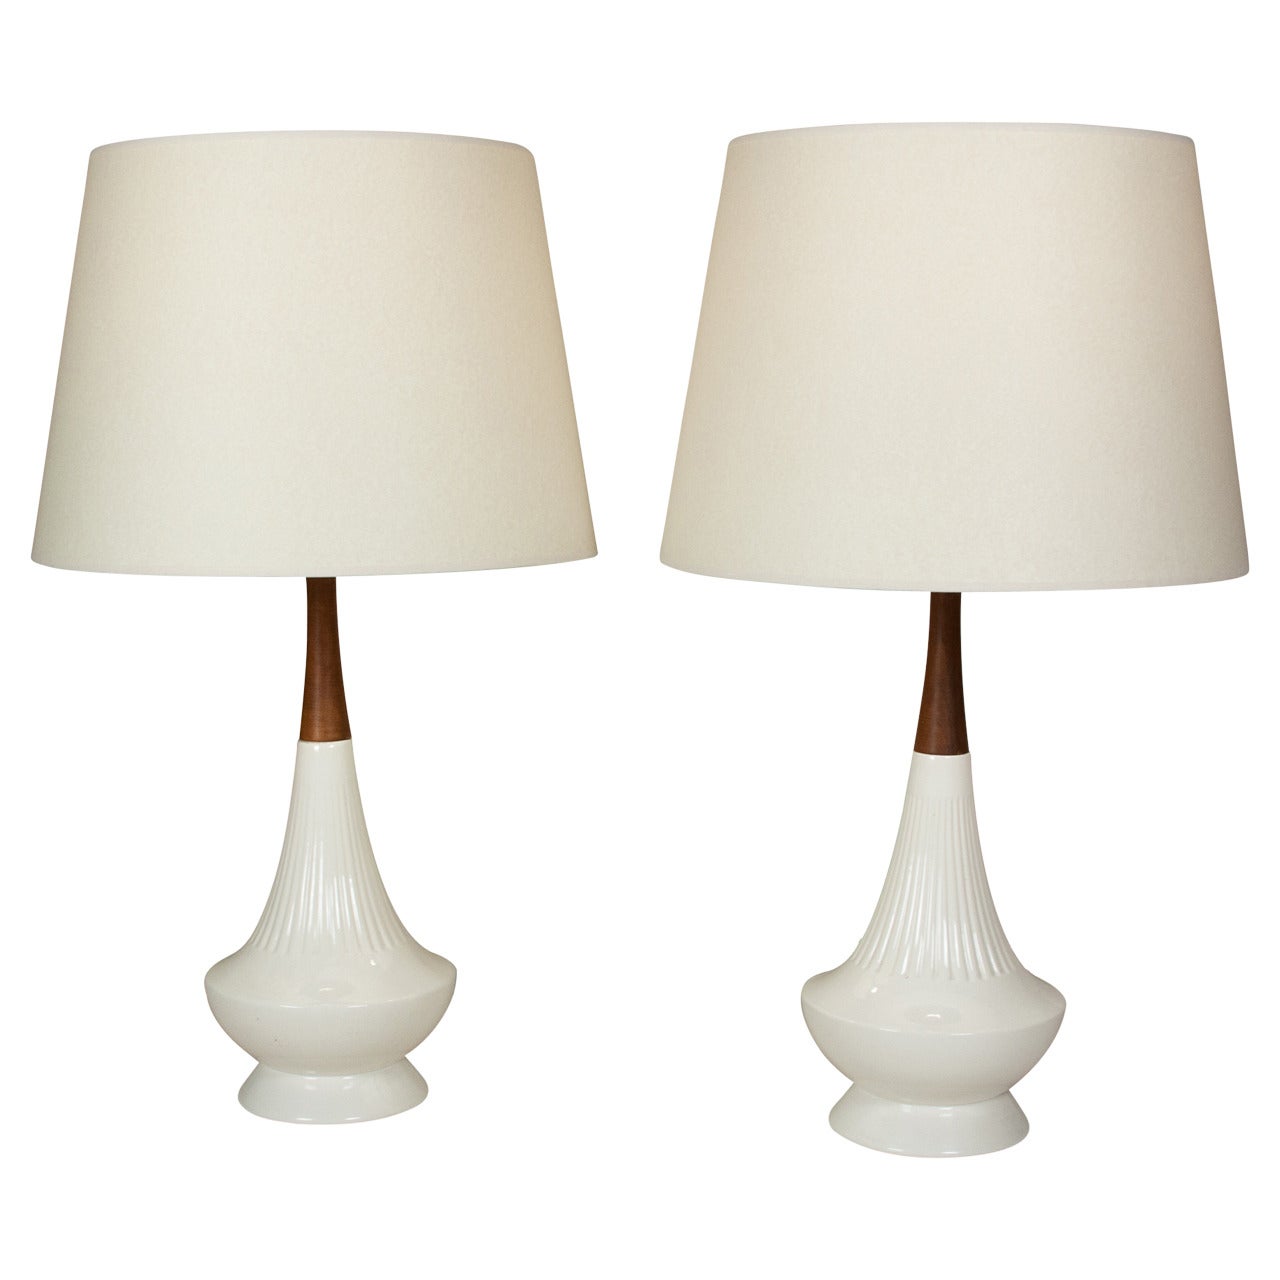 Pair of Ceramic and Walnut Table Lamps